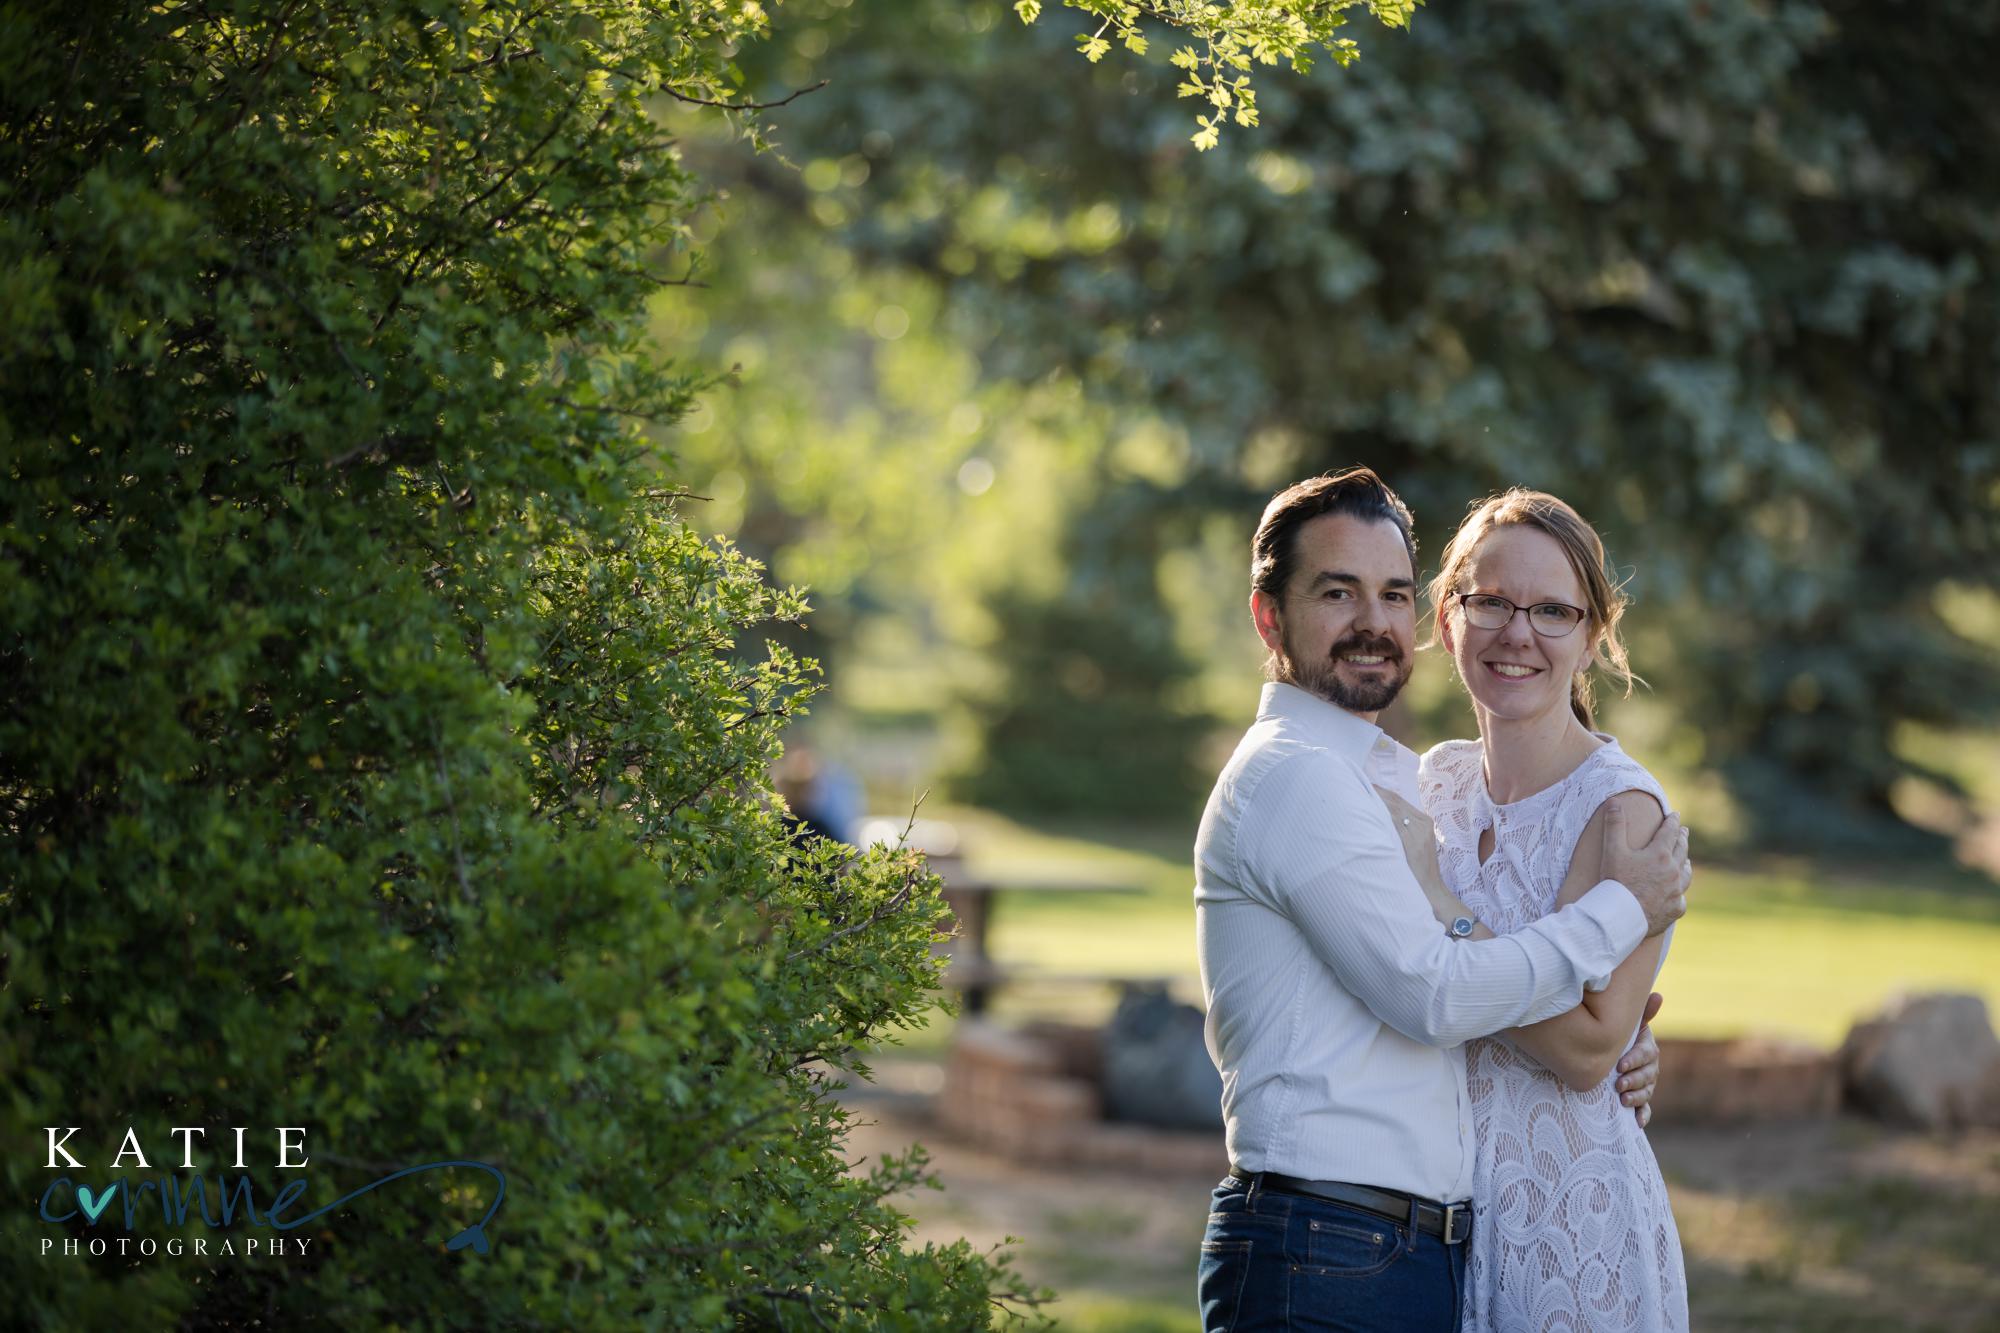 Colorado Springs couple hold each other during engagement session